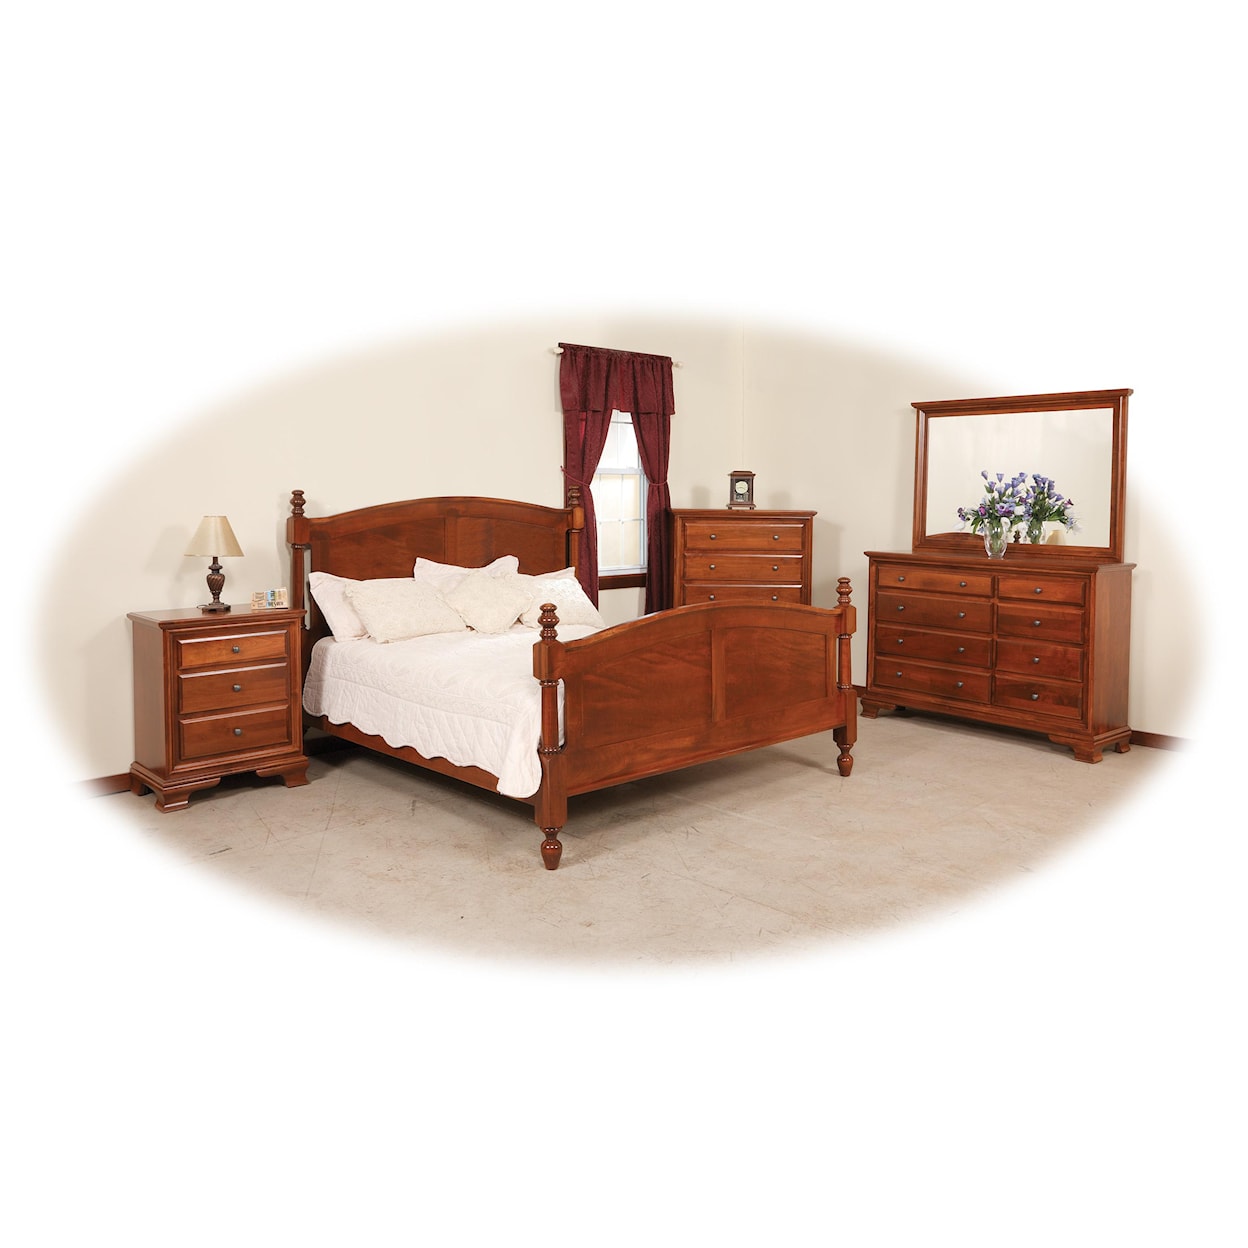 Daniel's Amish Classic King Bedroom Group